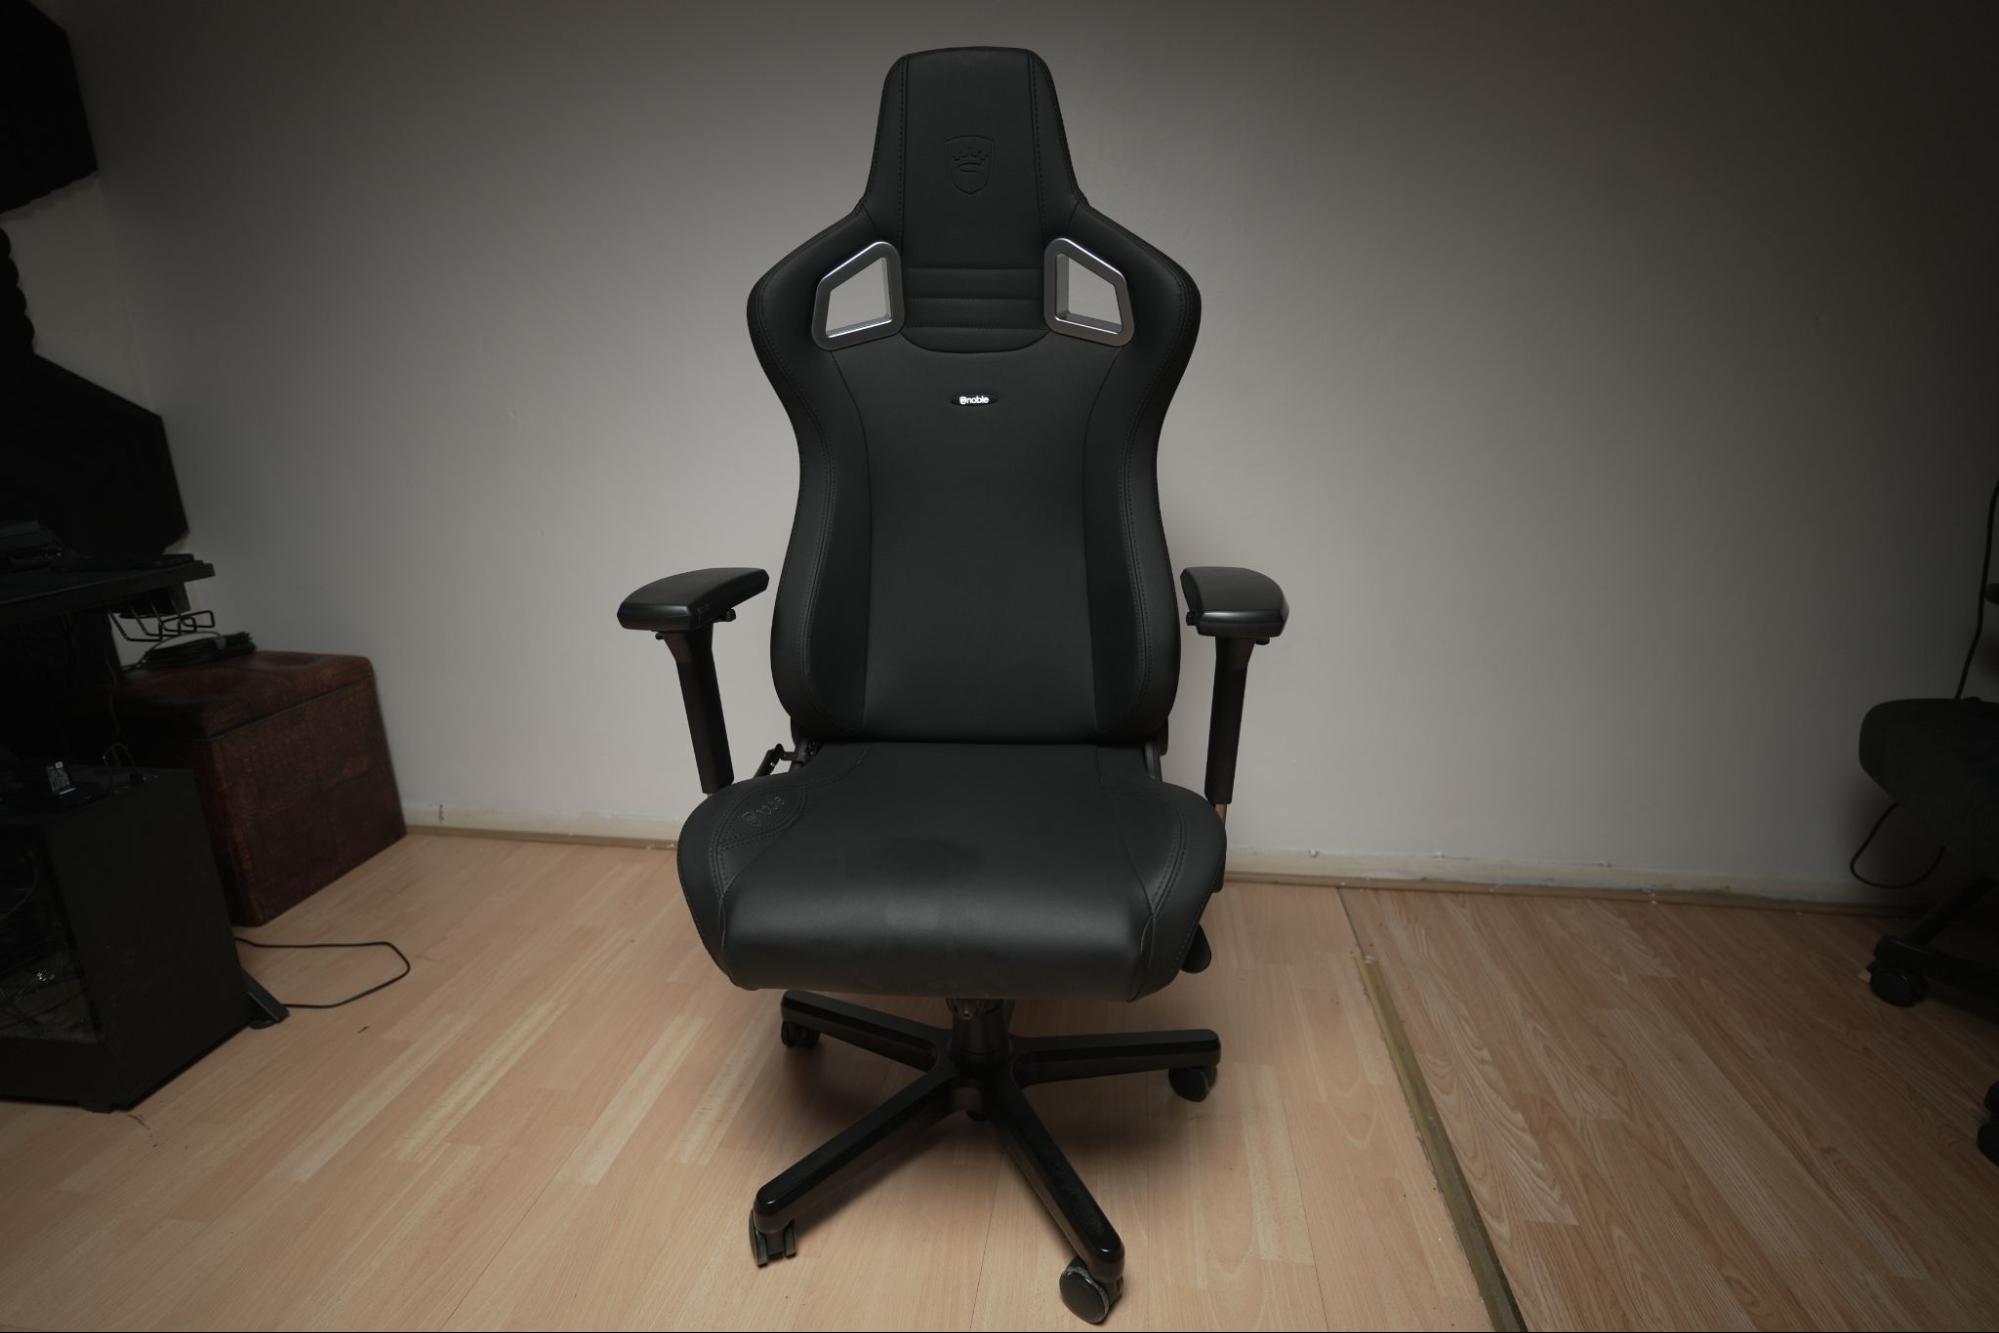 Noblechair Epic TX Black Edition Review: A Noble Fit for the